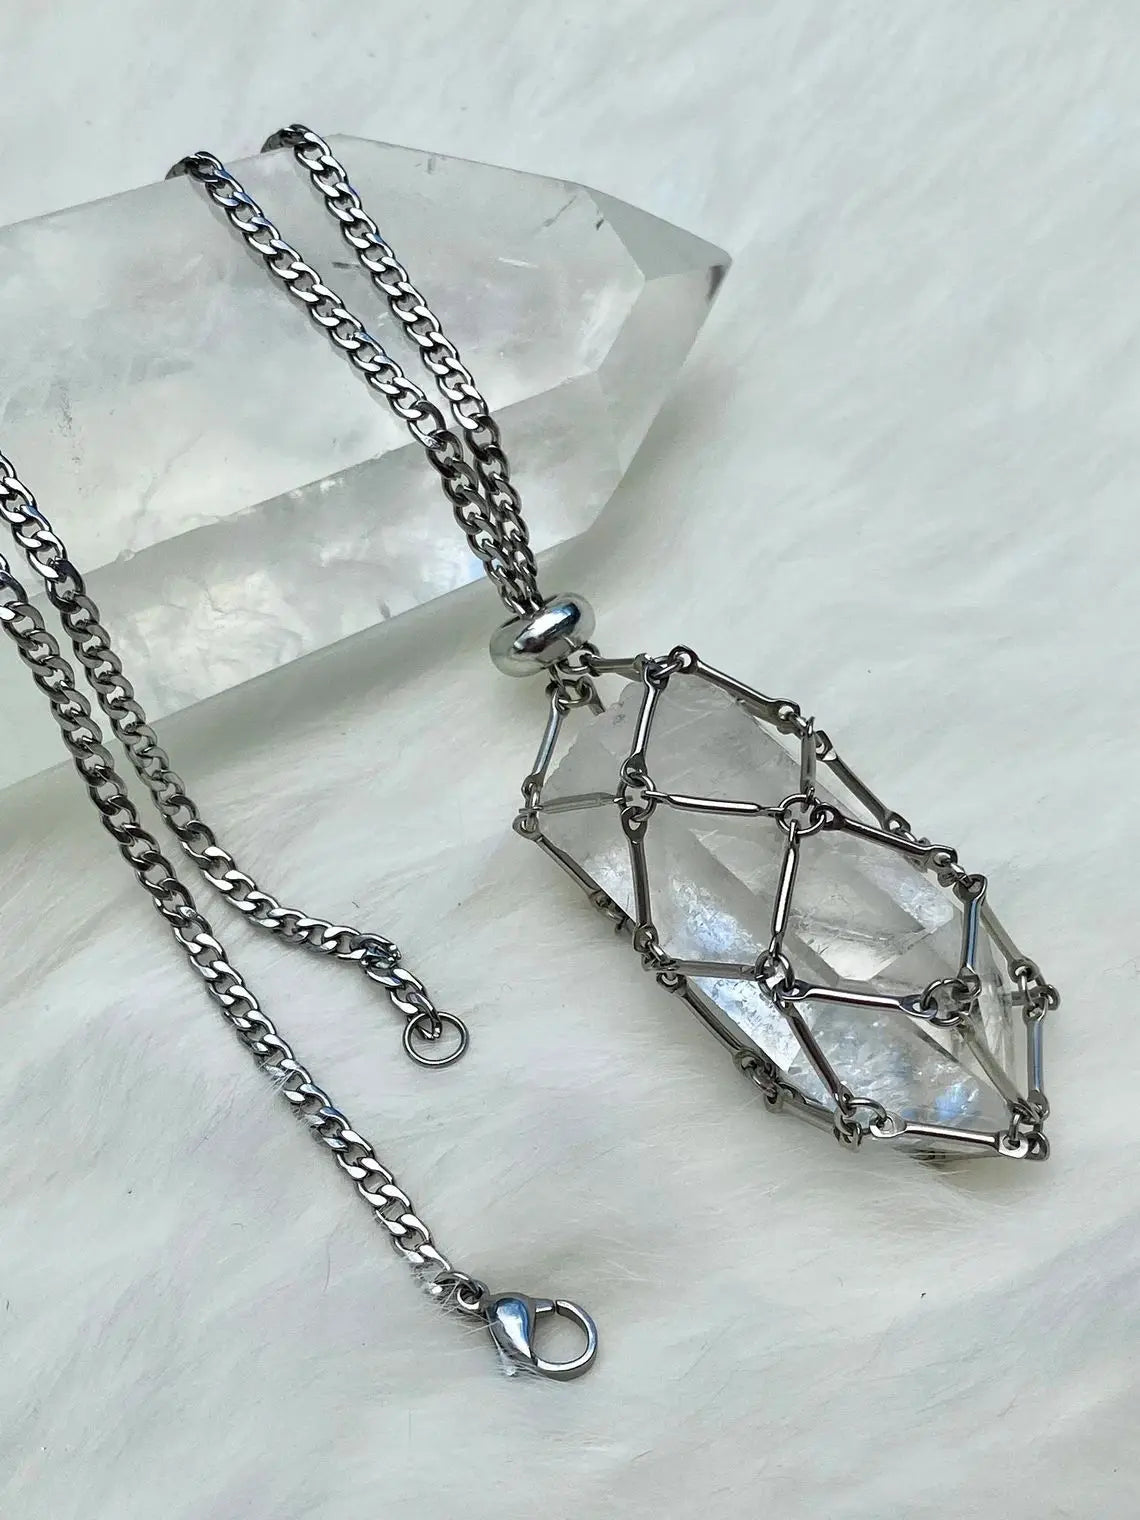 Stainless Steel Design Crystal Cage Necklace Holder Net Metal Chain Stone Collecting Holder Adjustable Pendant Copper Jewelry